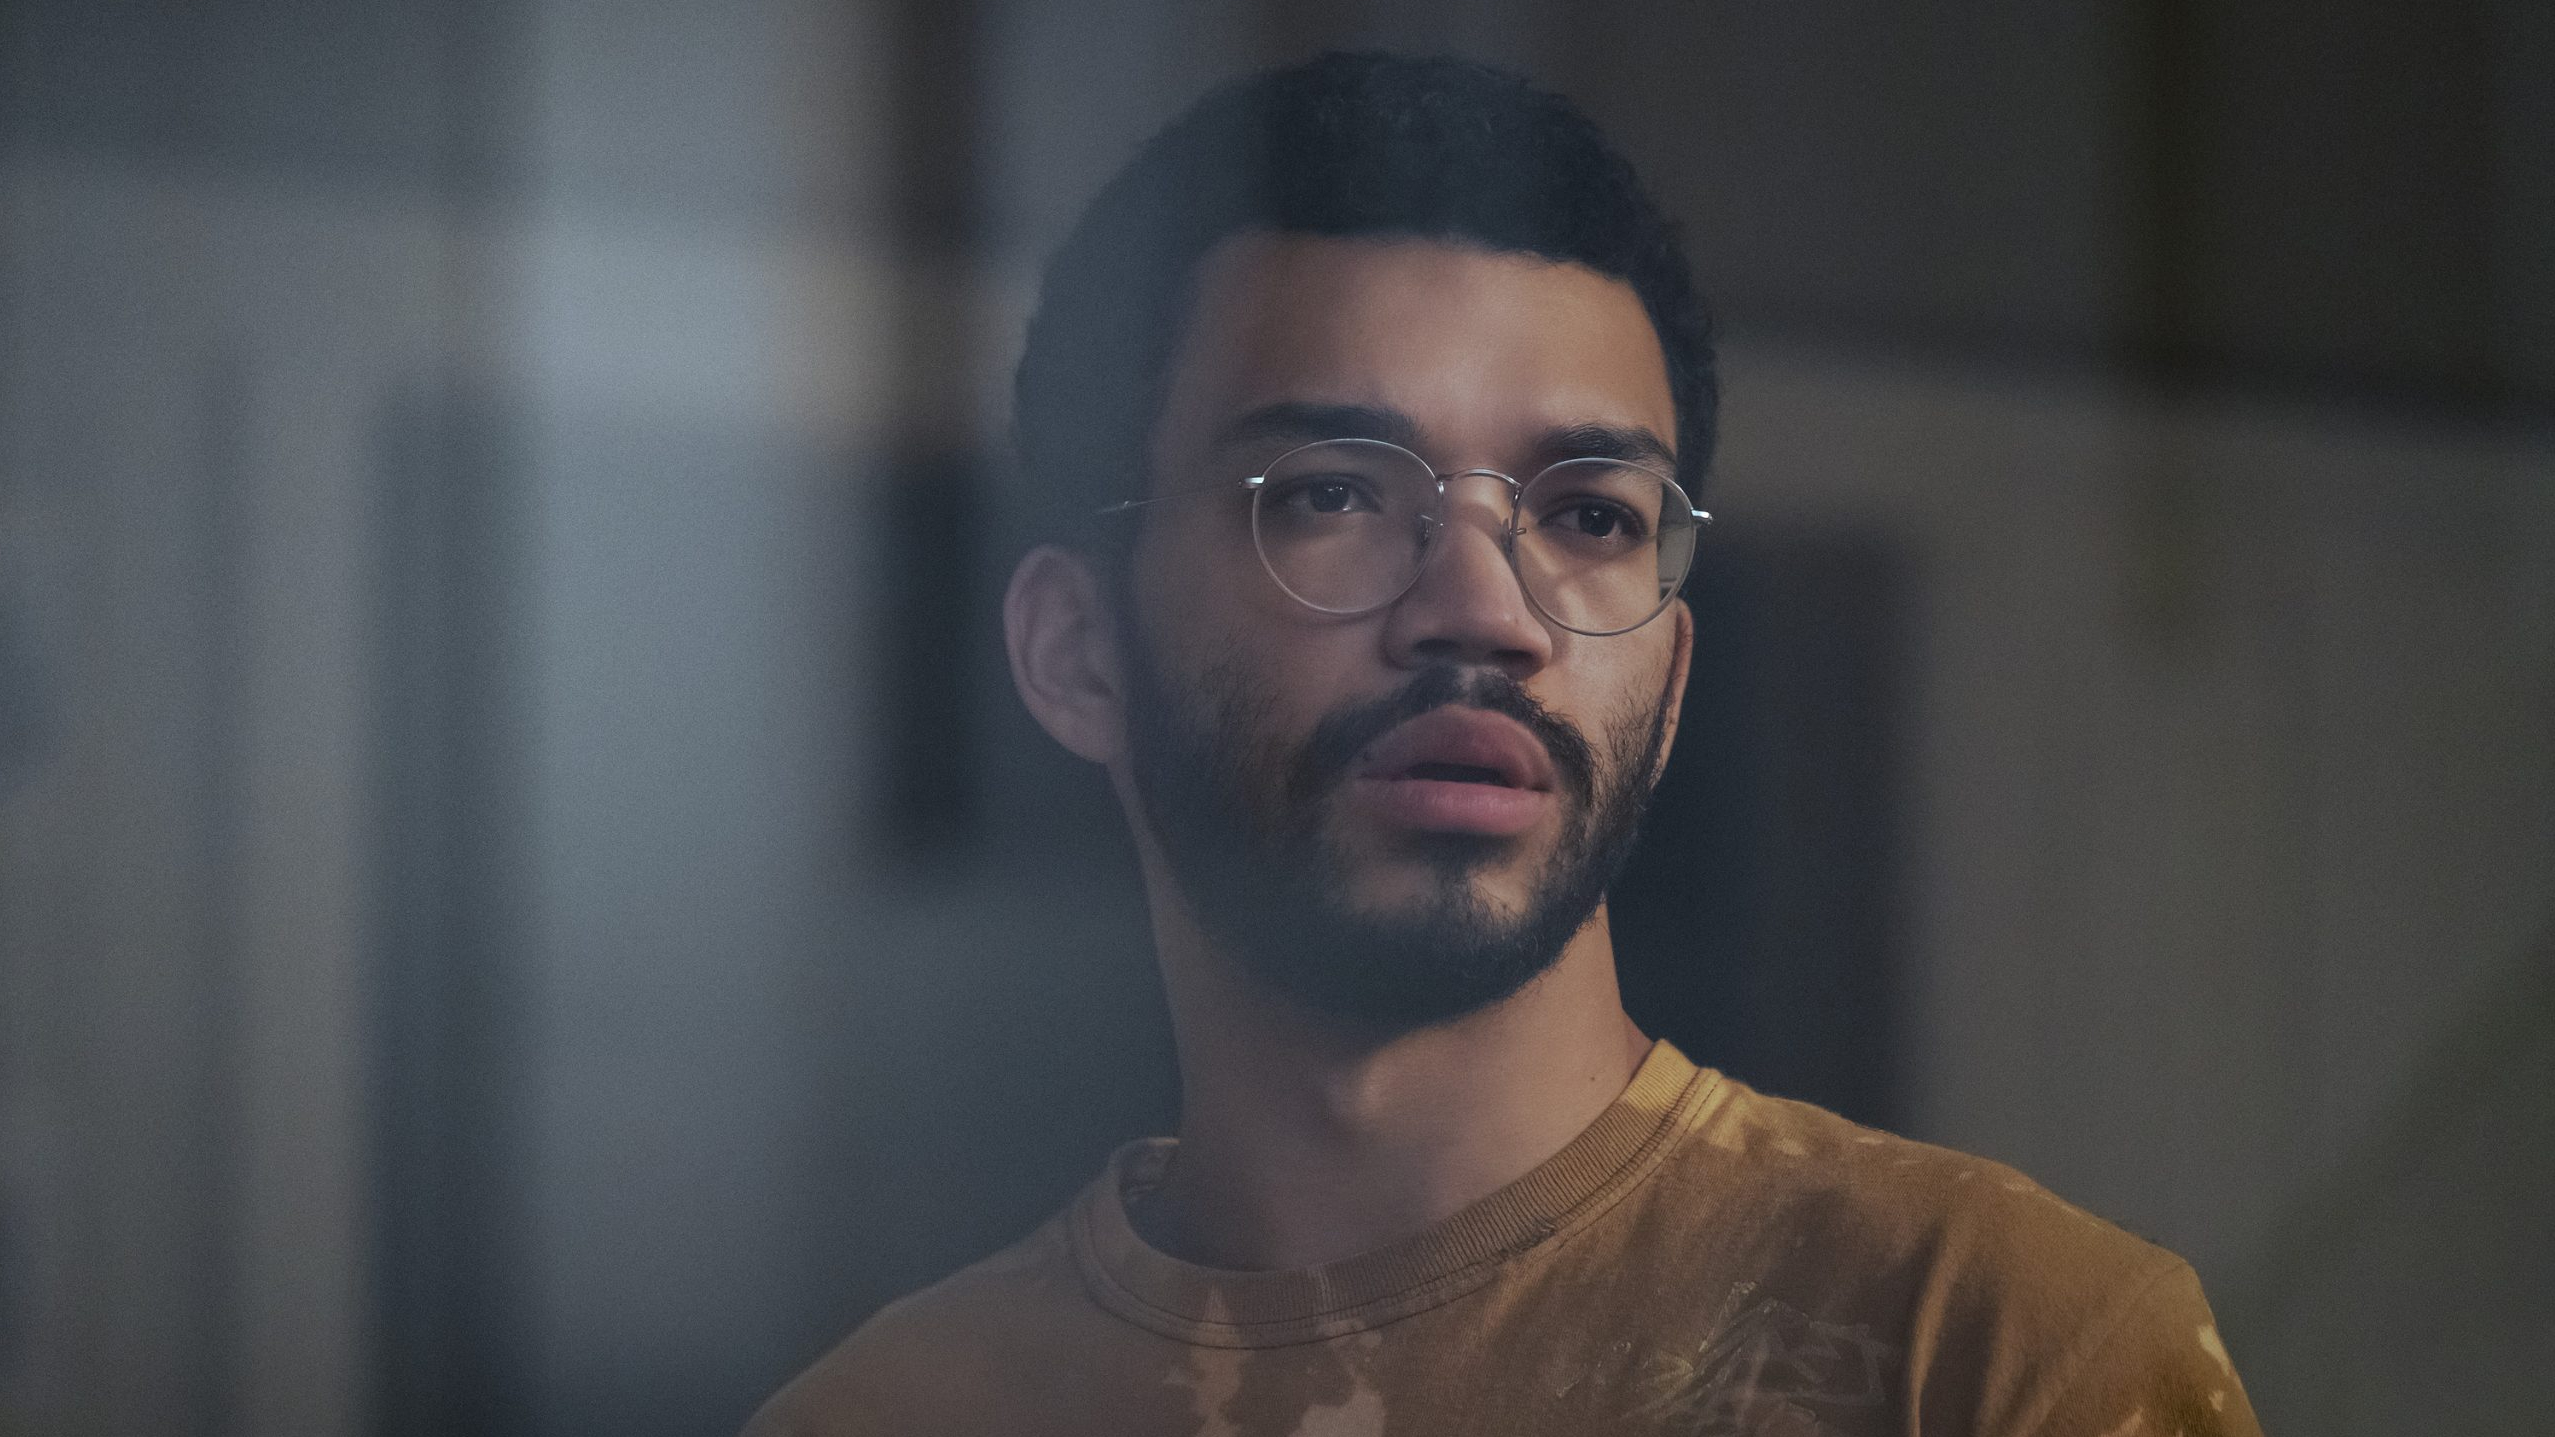 Justice Smith on The Voyeurs and